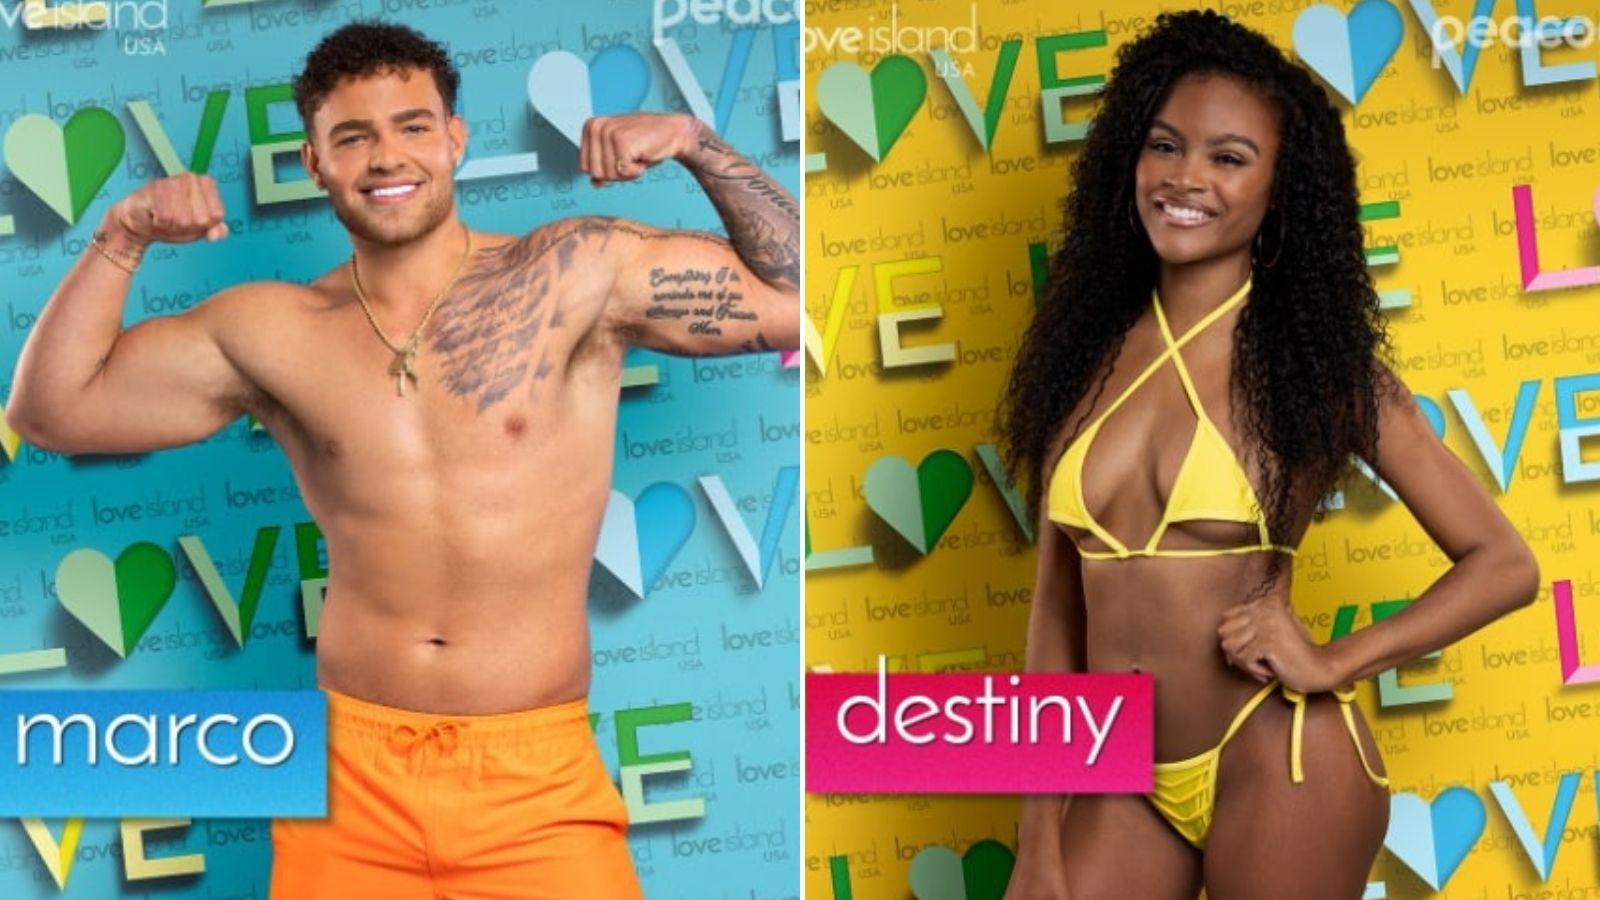 Destiny and Marco from Love Island